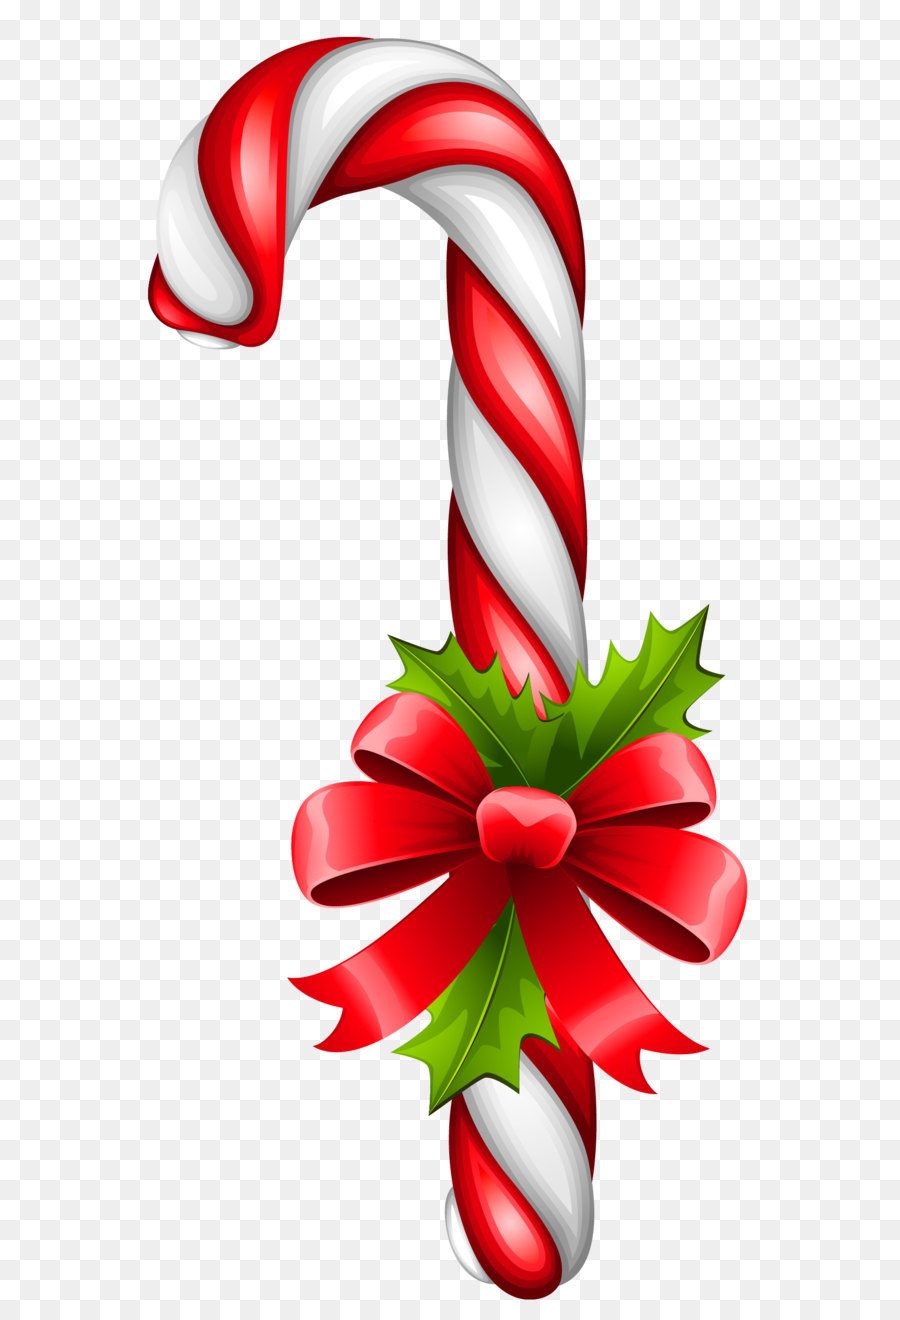 Candy cane Christmas Stick candy - Christmas Candy Cane Transparent PNG Clipart png download - 1269*2573 - Free Transparent Candy Cane png Download.